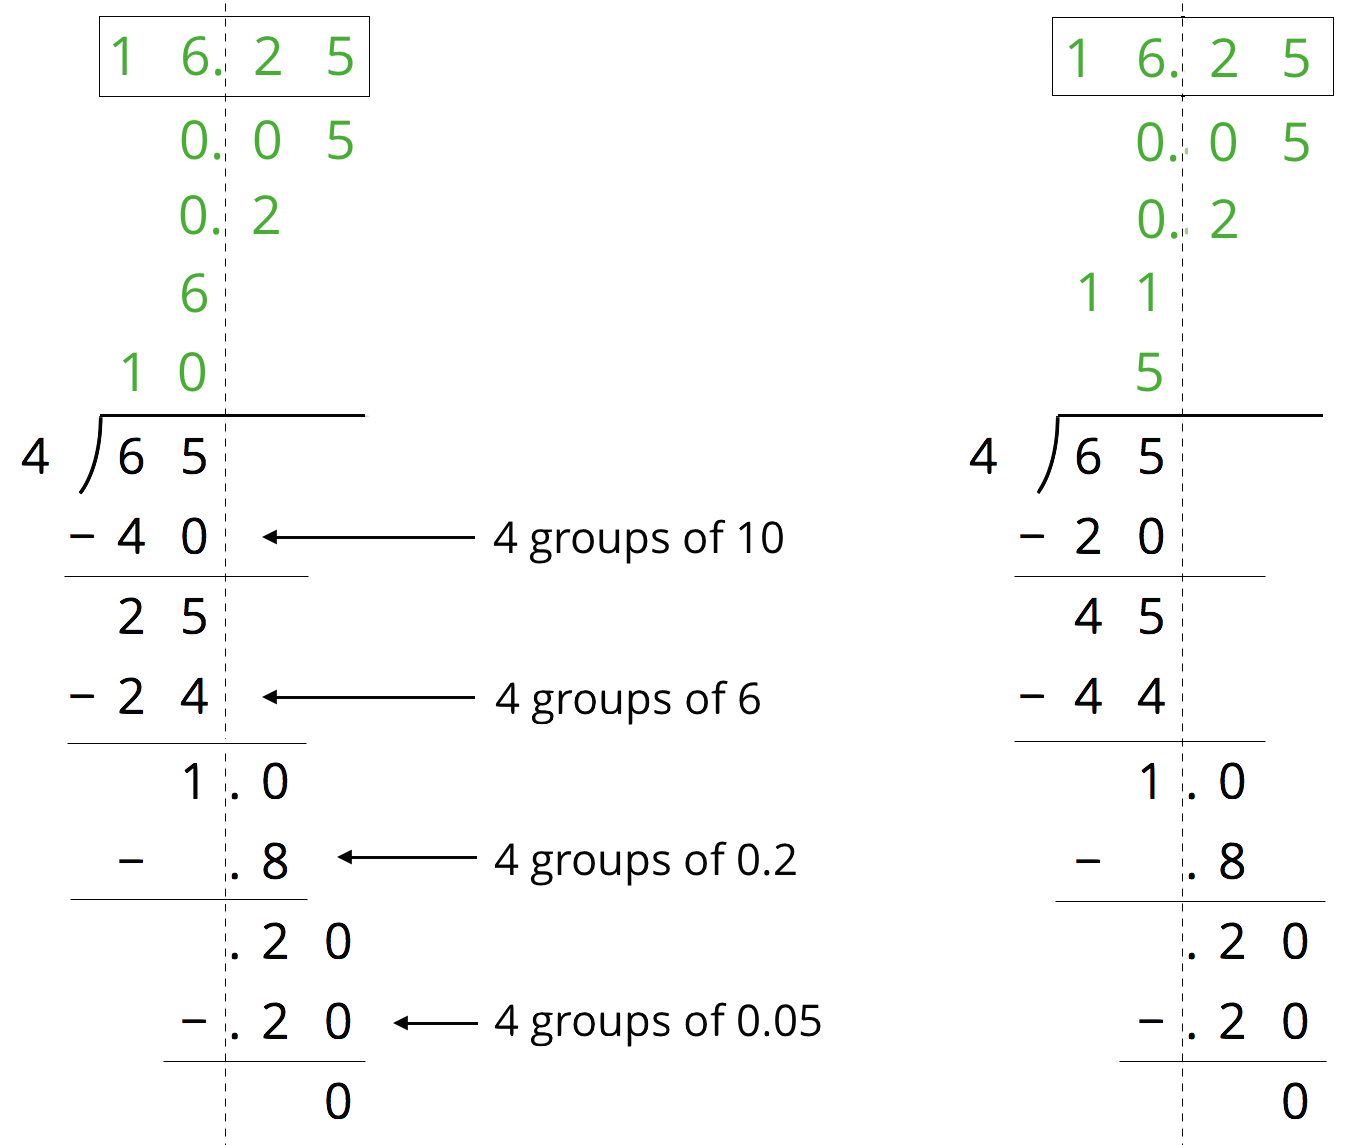 DIVISION  DECIMAL QUOTENT DIVISION - DIVISION WITH COMMA IN THE